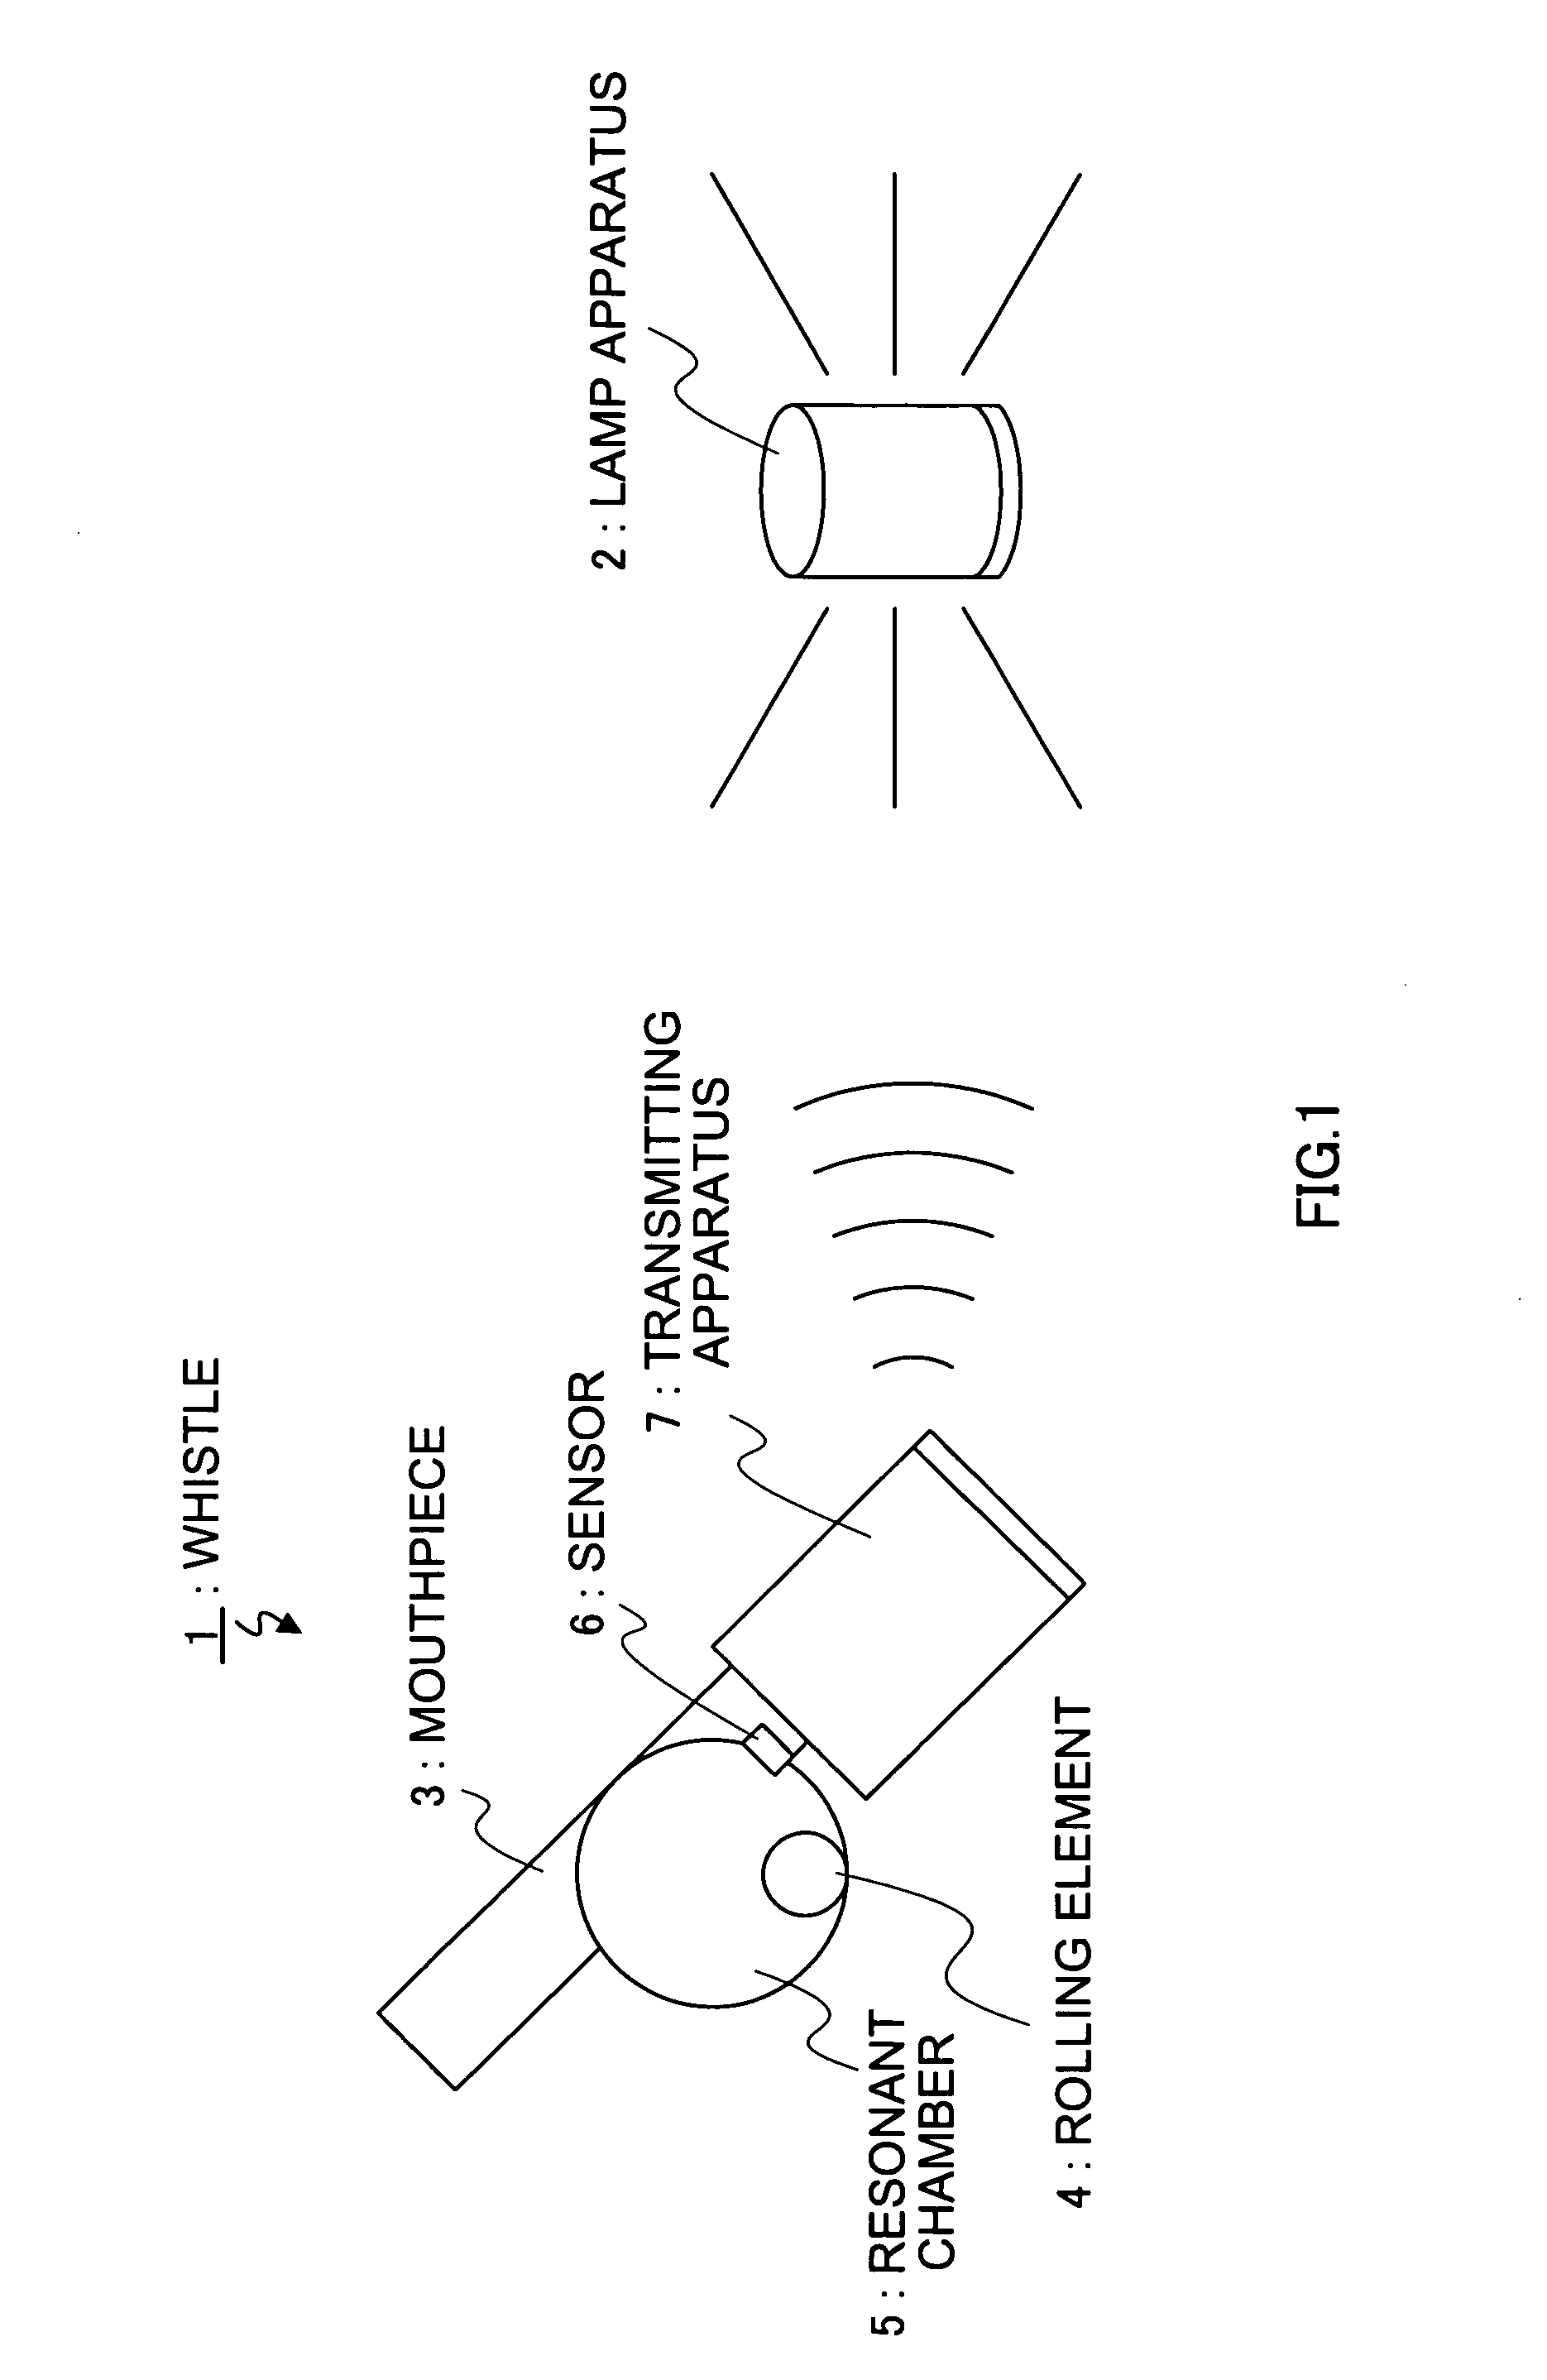 Whistle and whistle notification device